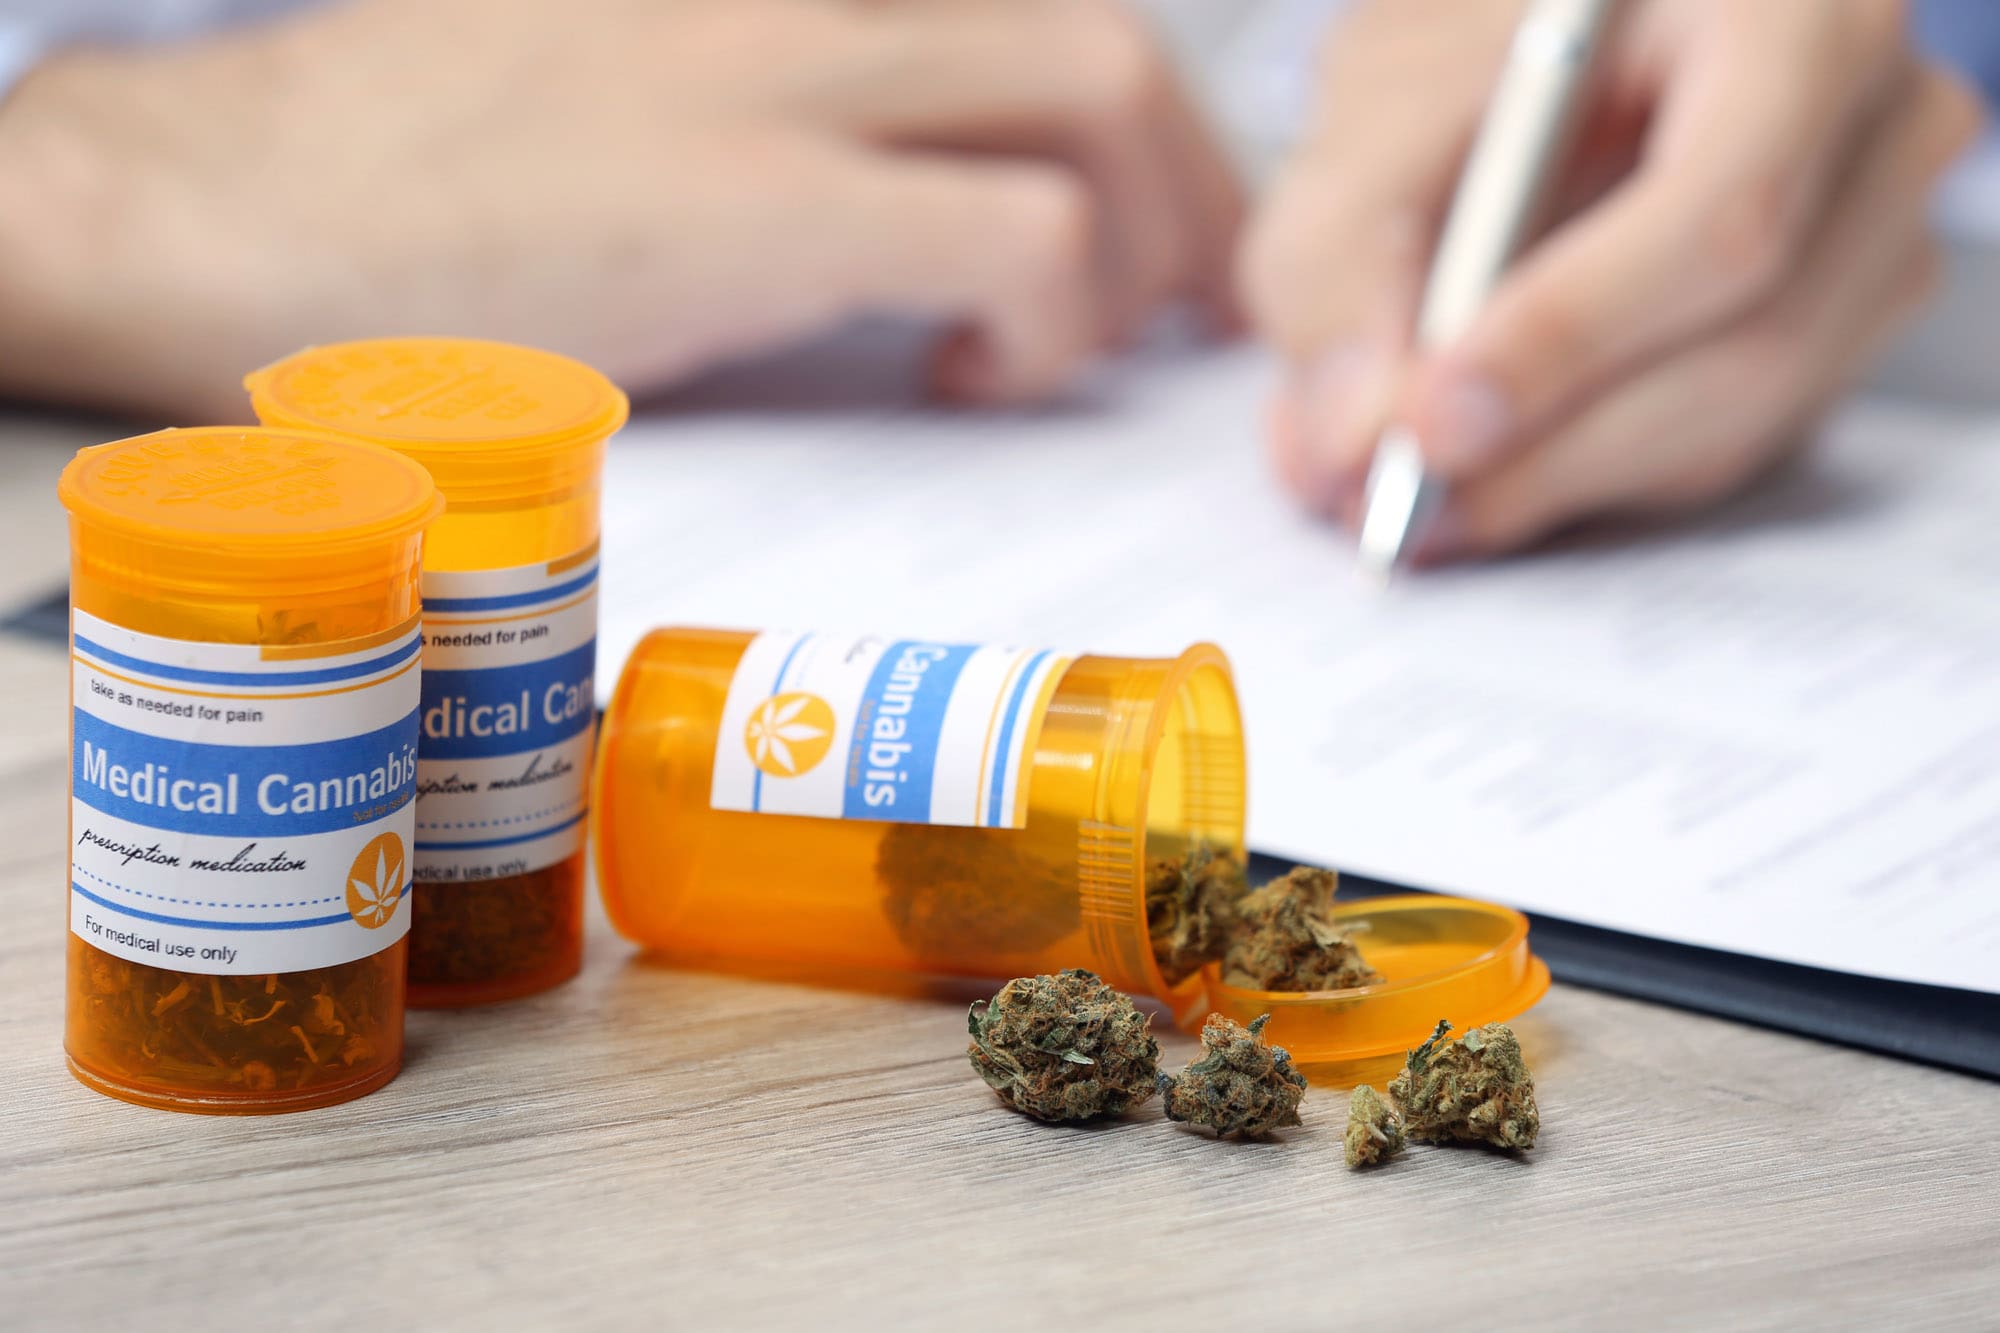 A Medical Cannabis Doctor Can Help Manage Your Medical Condition